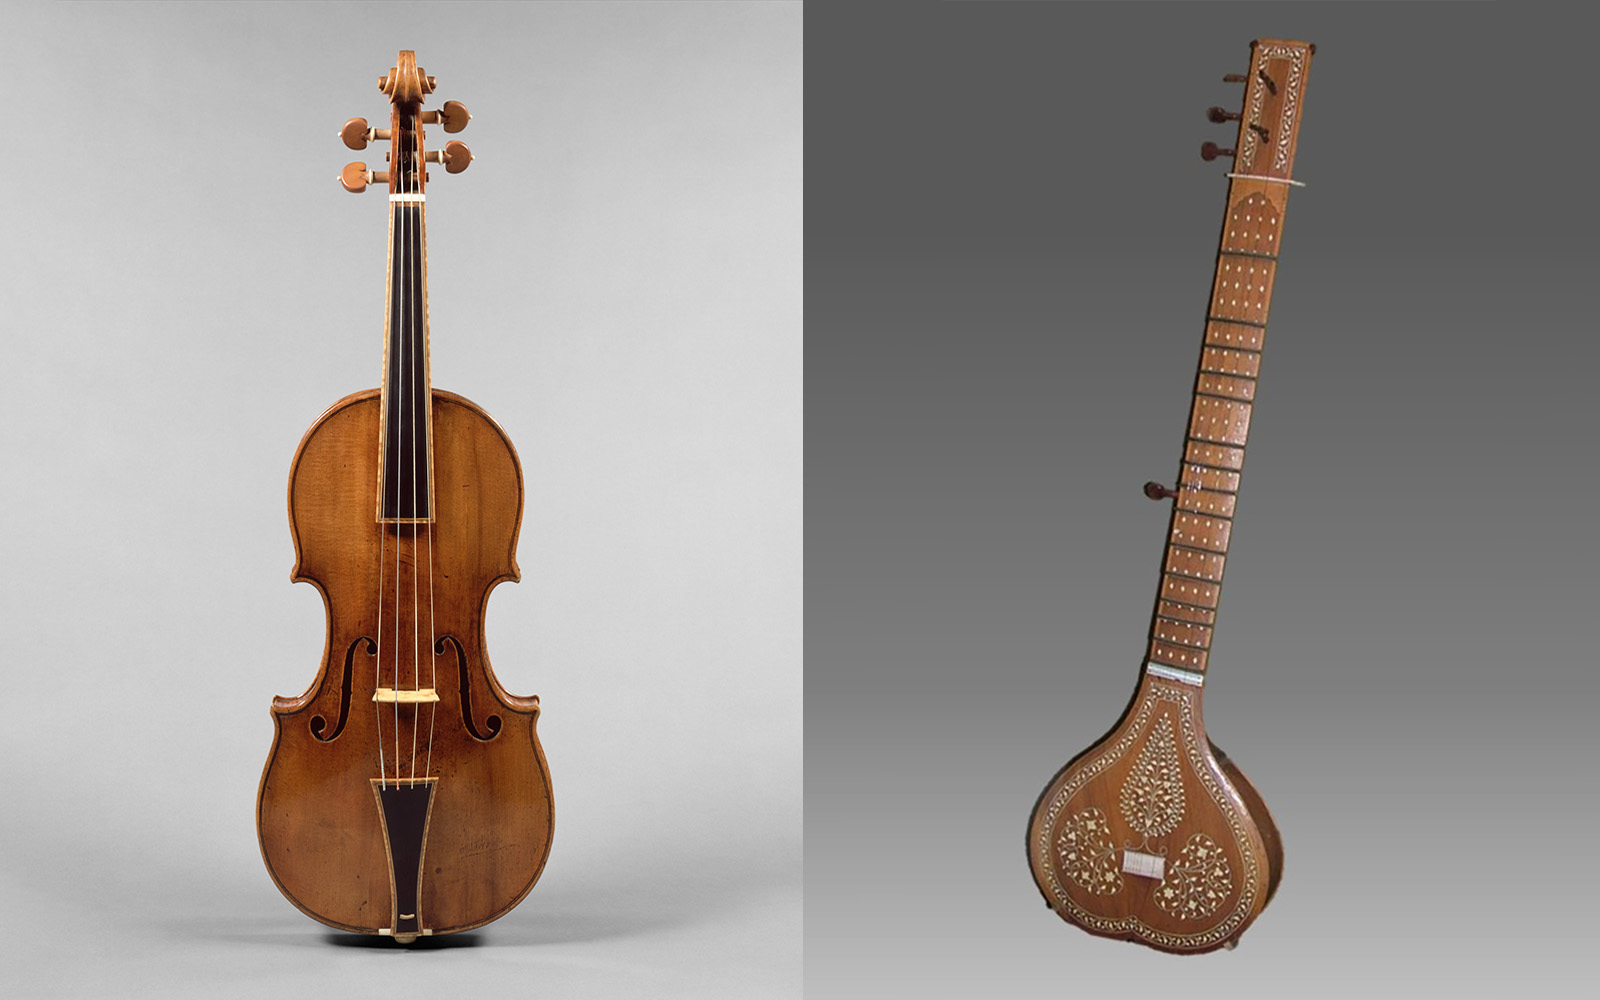 Composite image of a sitar and a violin on a neutral background.